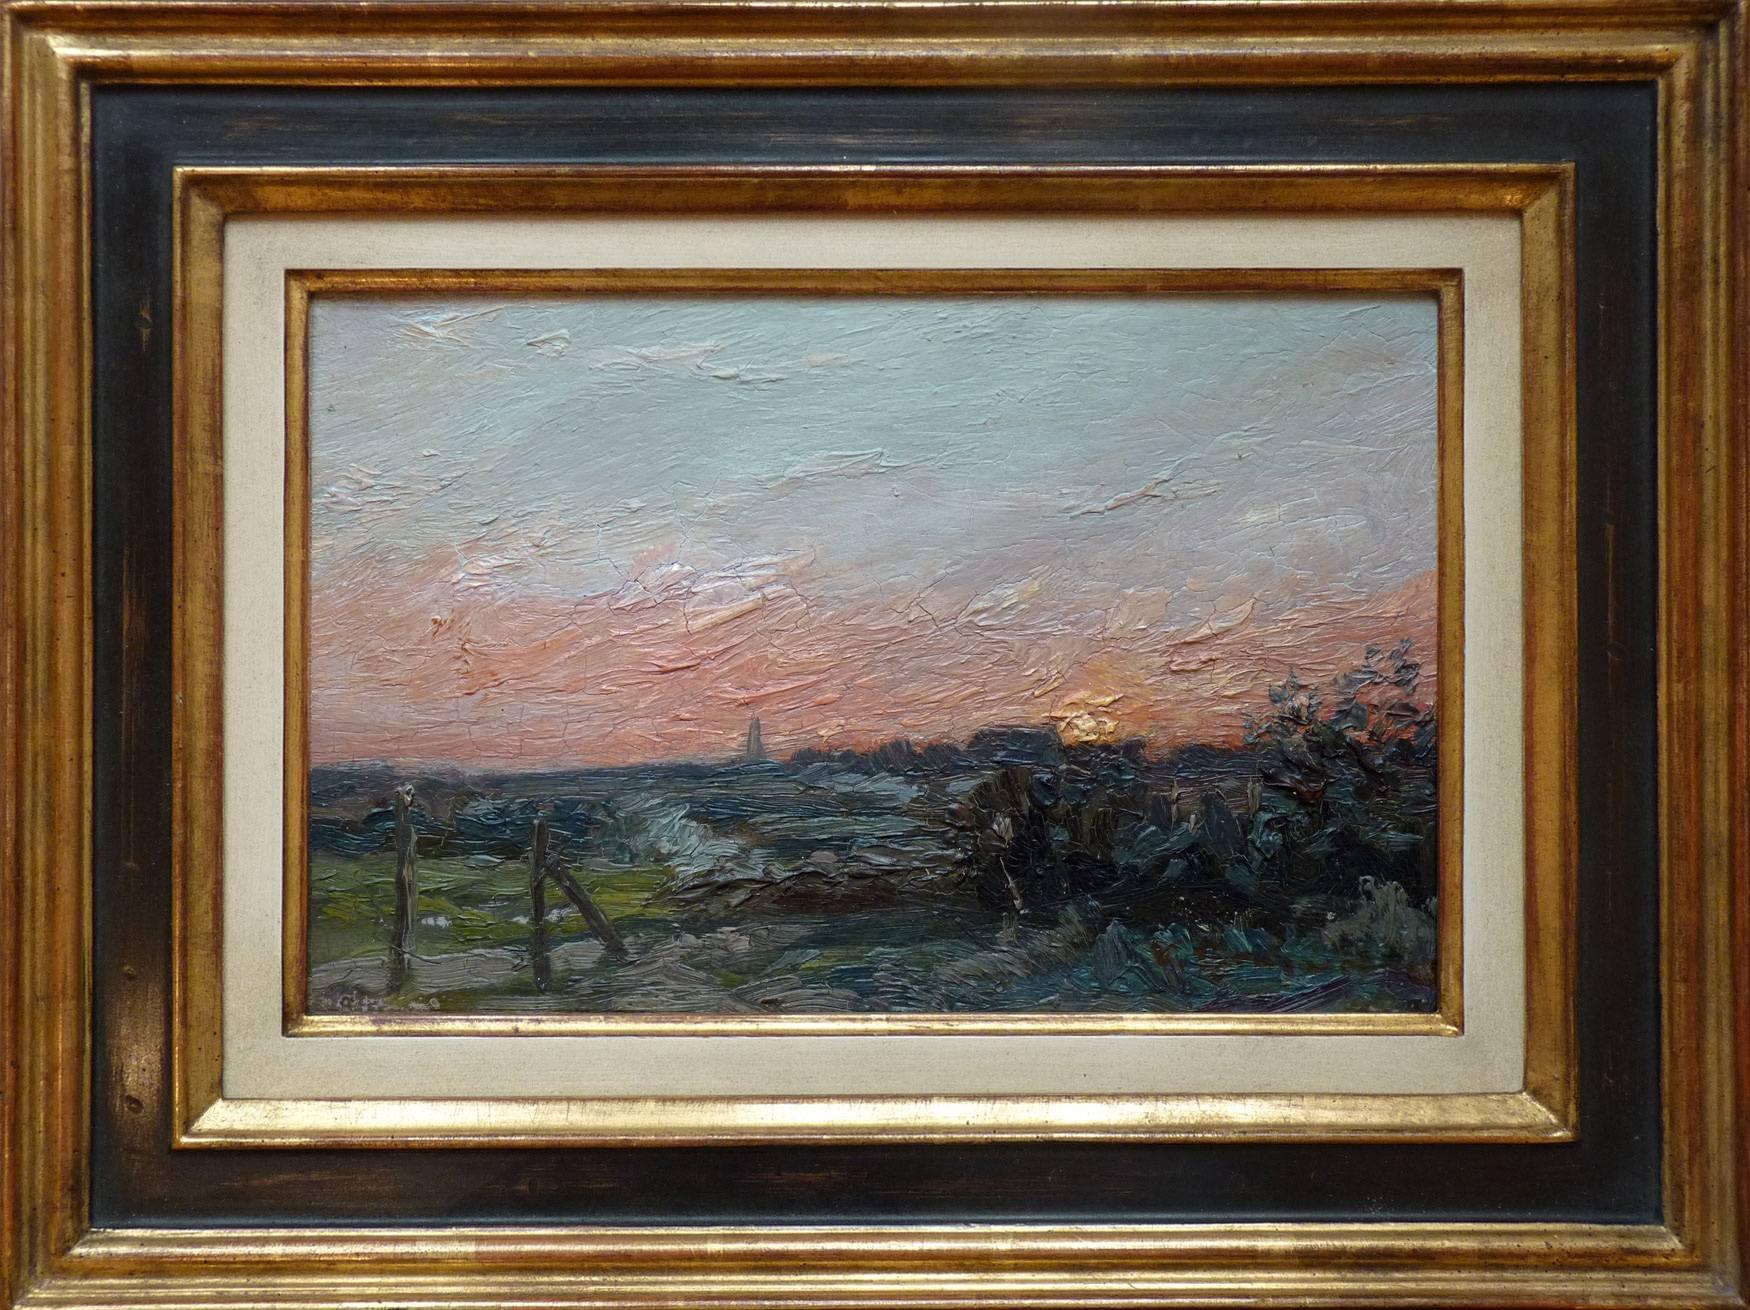 Landscape with village skyline at sunset, oil by french artist Brugairolles - Painting by Victor Brugairolles